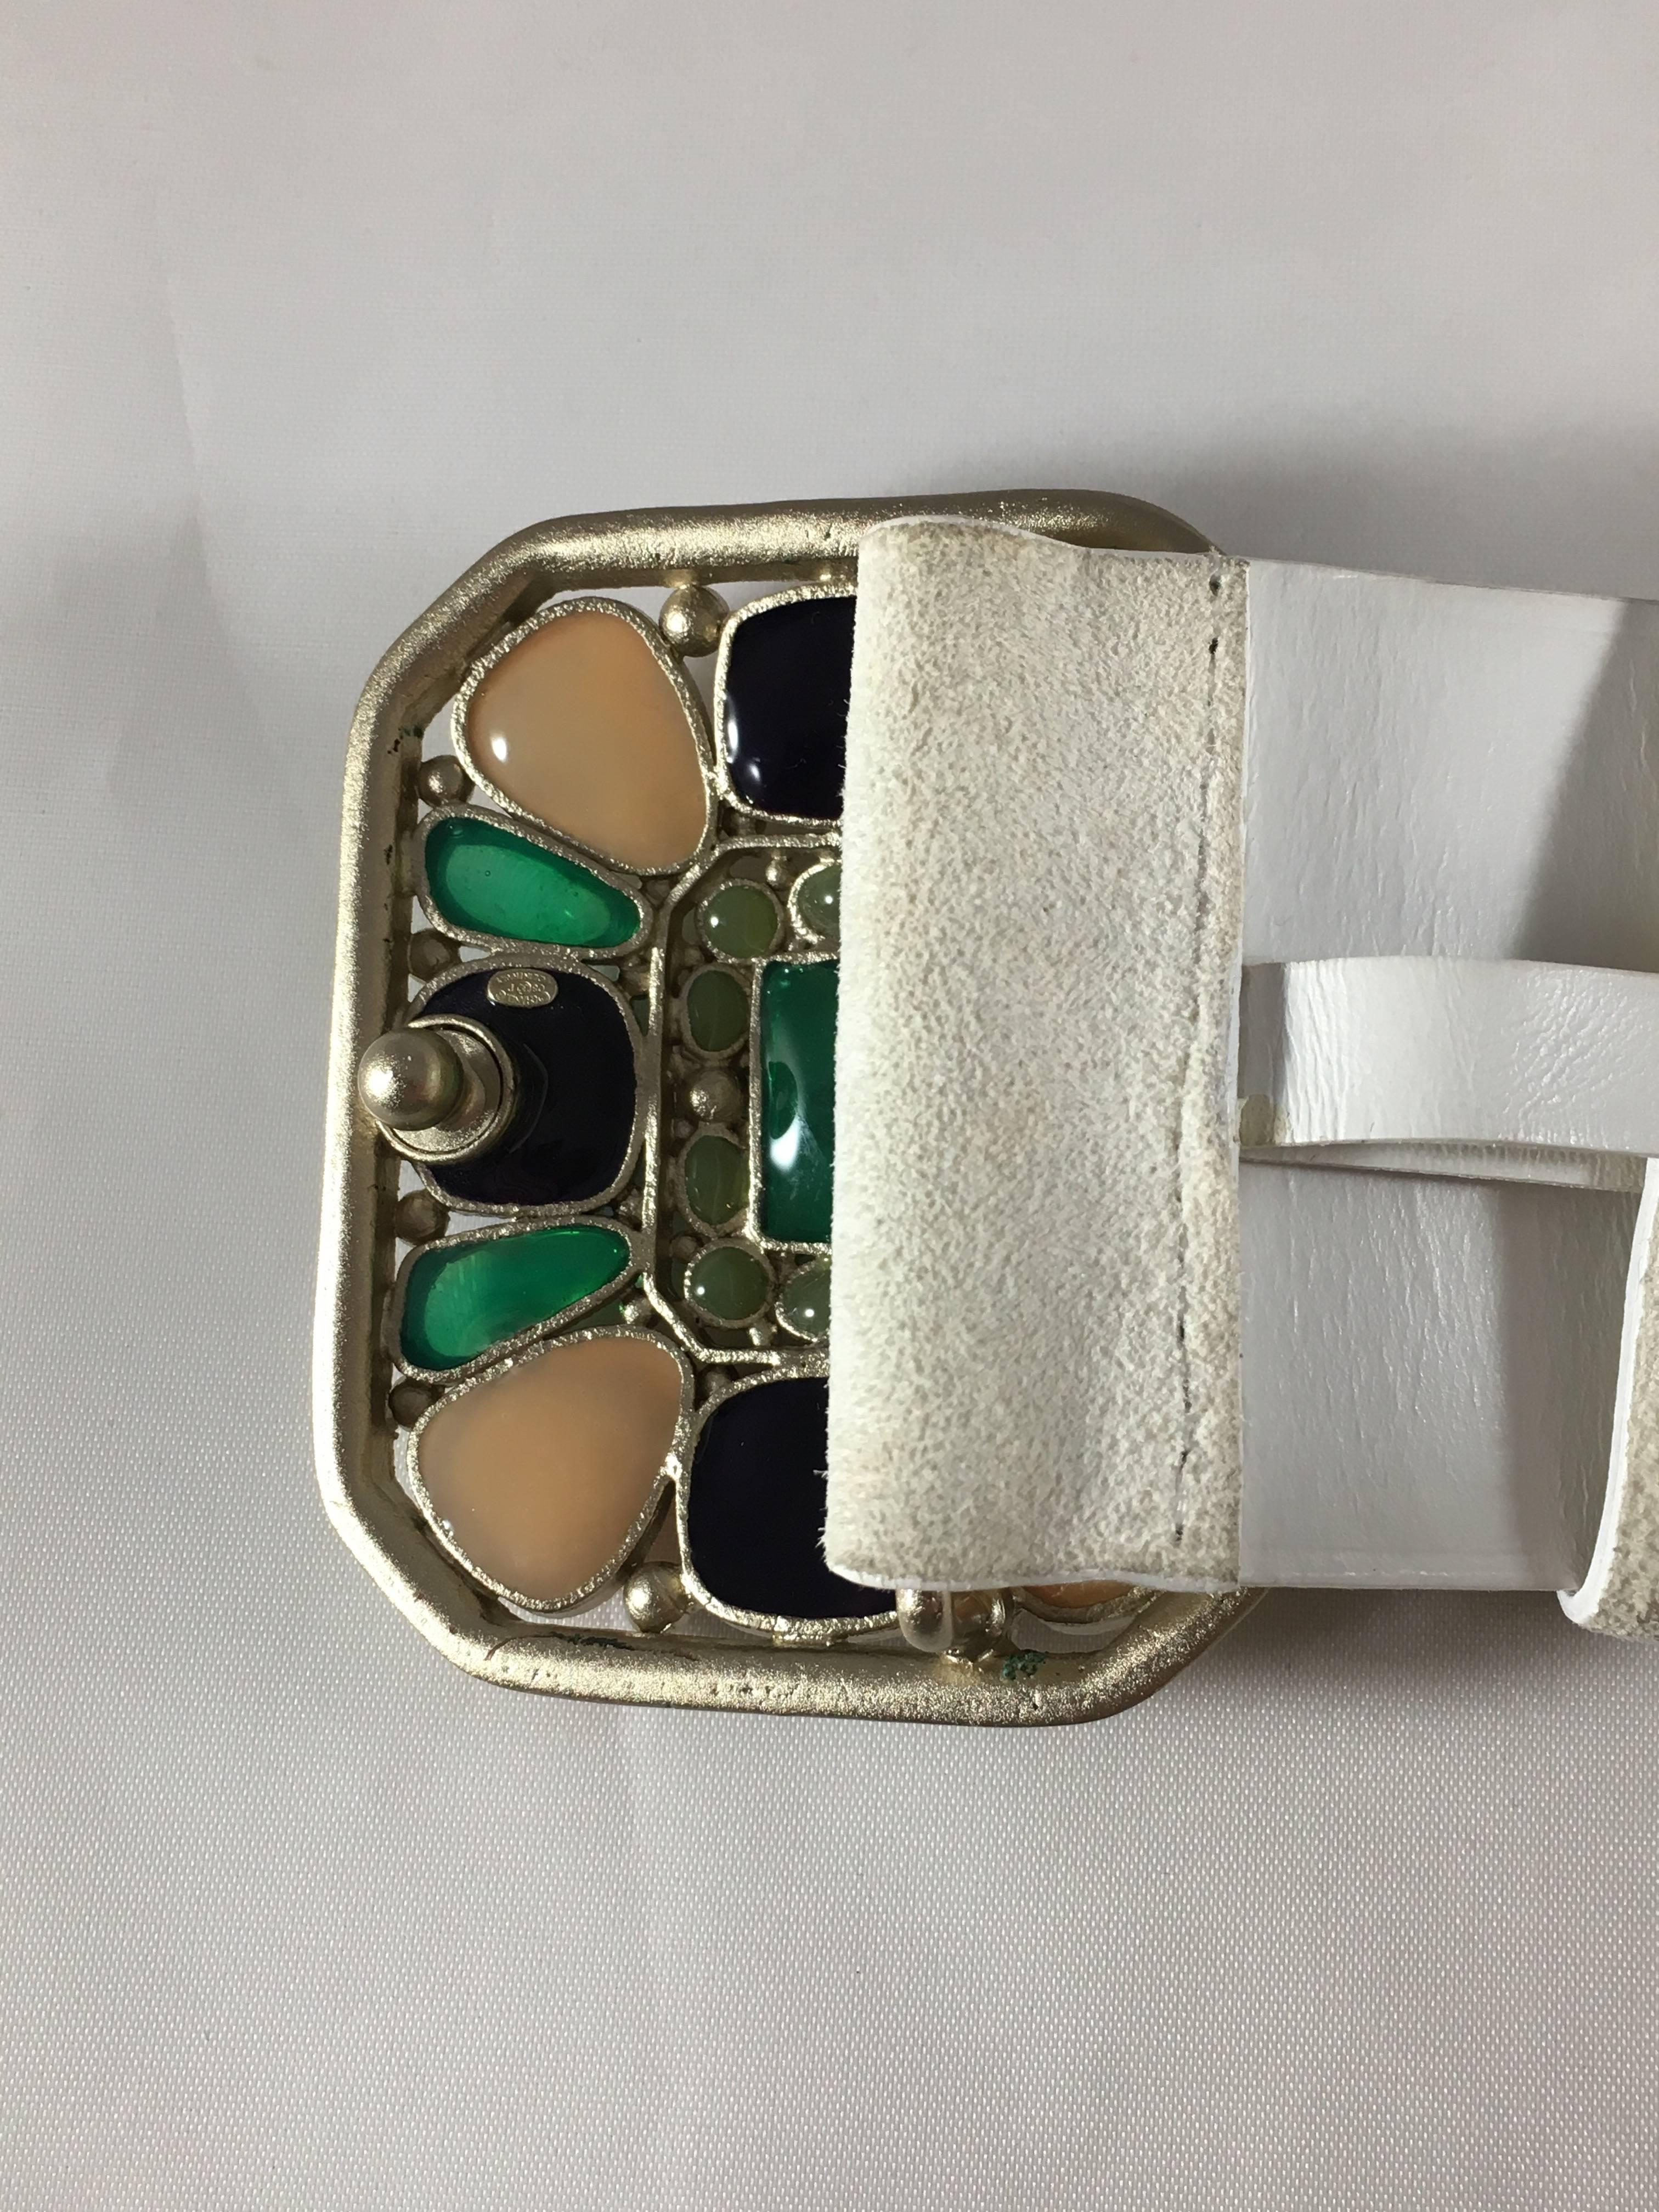 Chanel White Suede Belt With Purple Peach and Green Gripoix Jewel Buckle, Sz 38 2